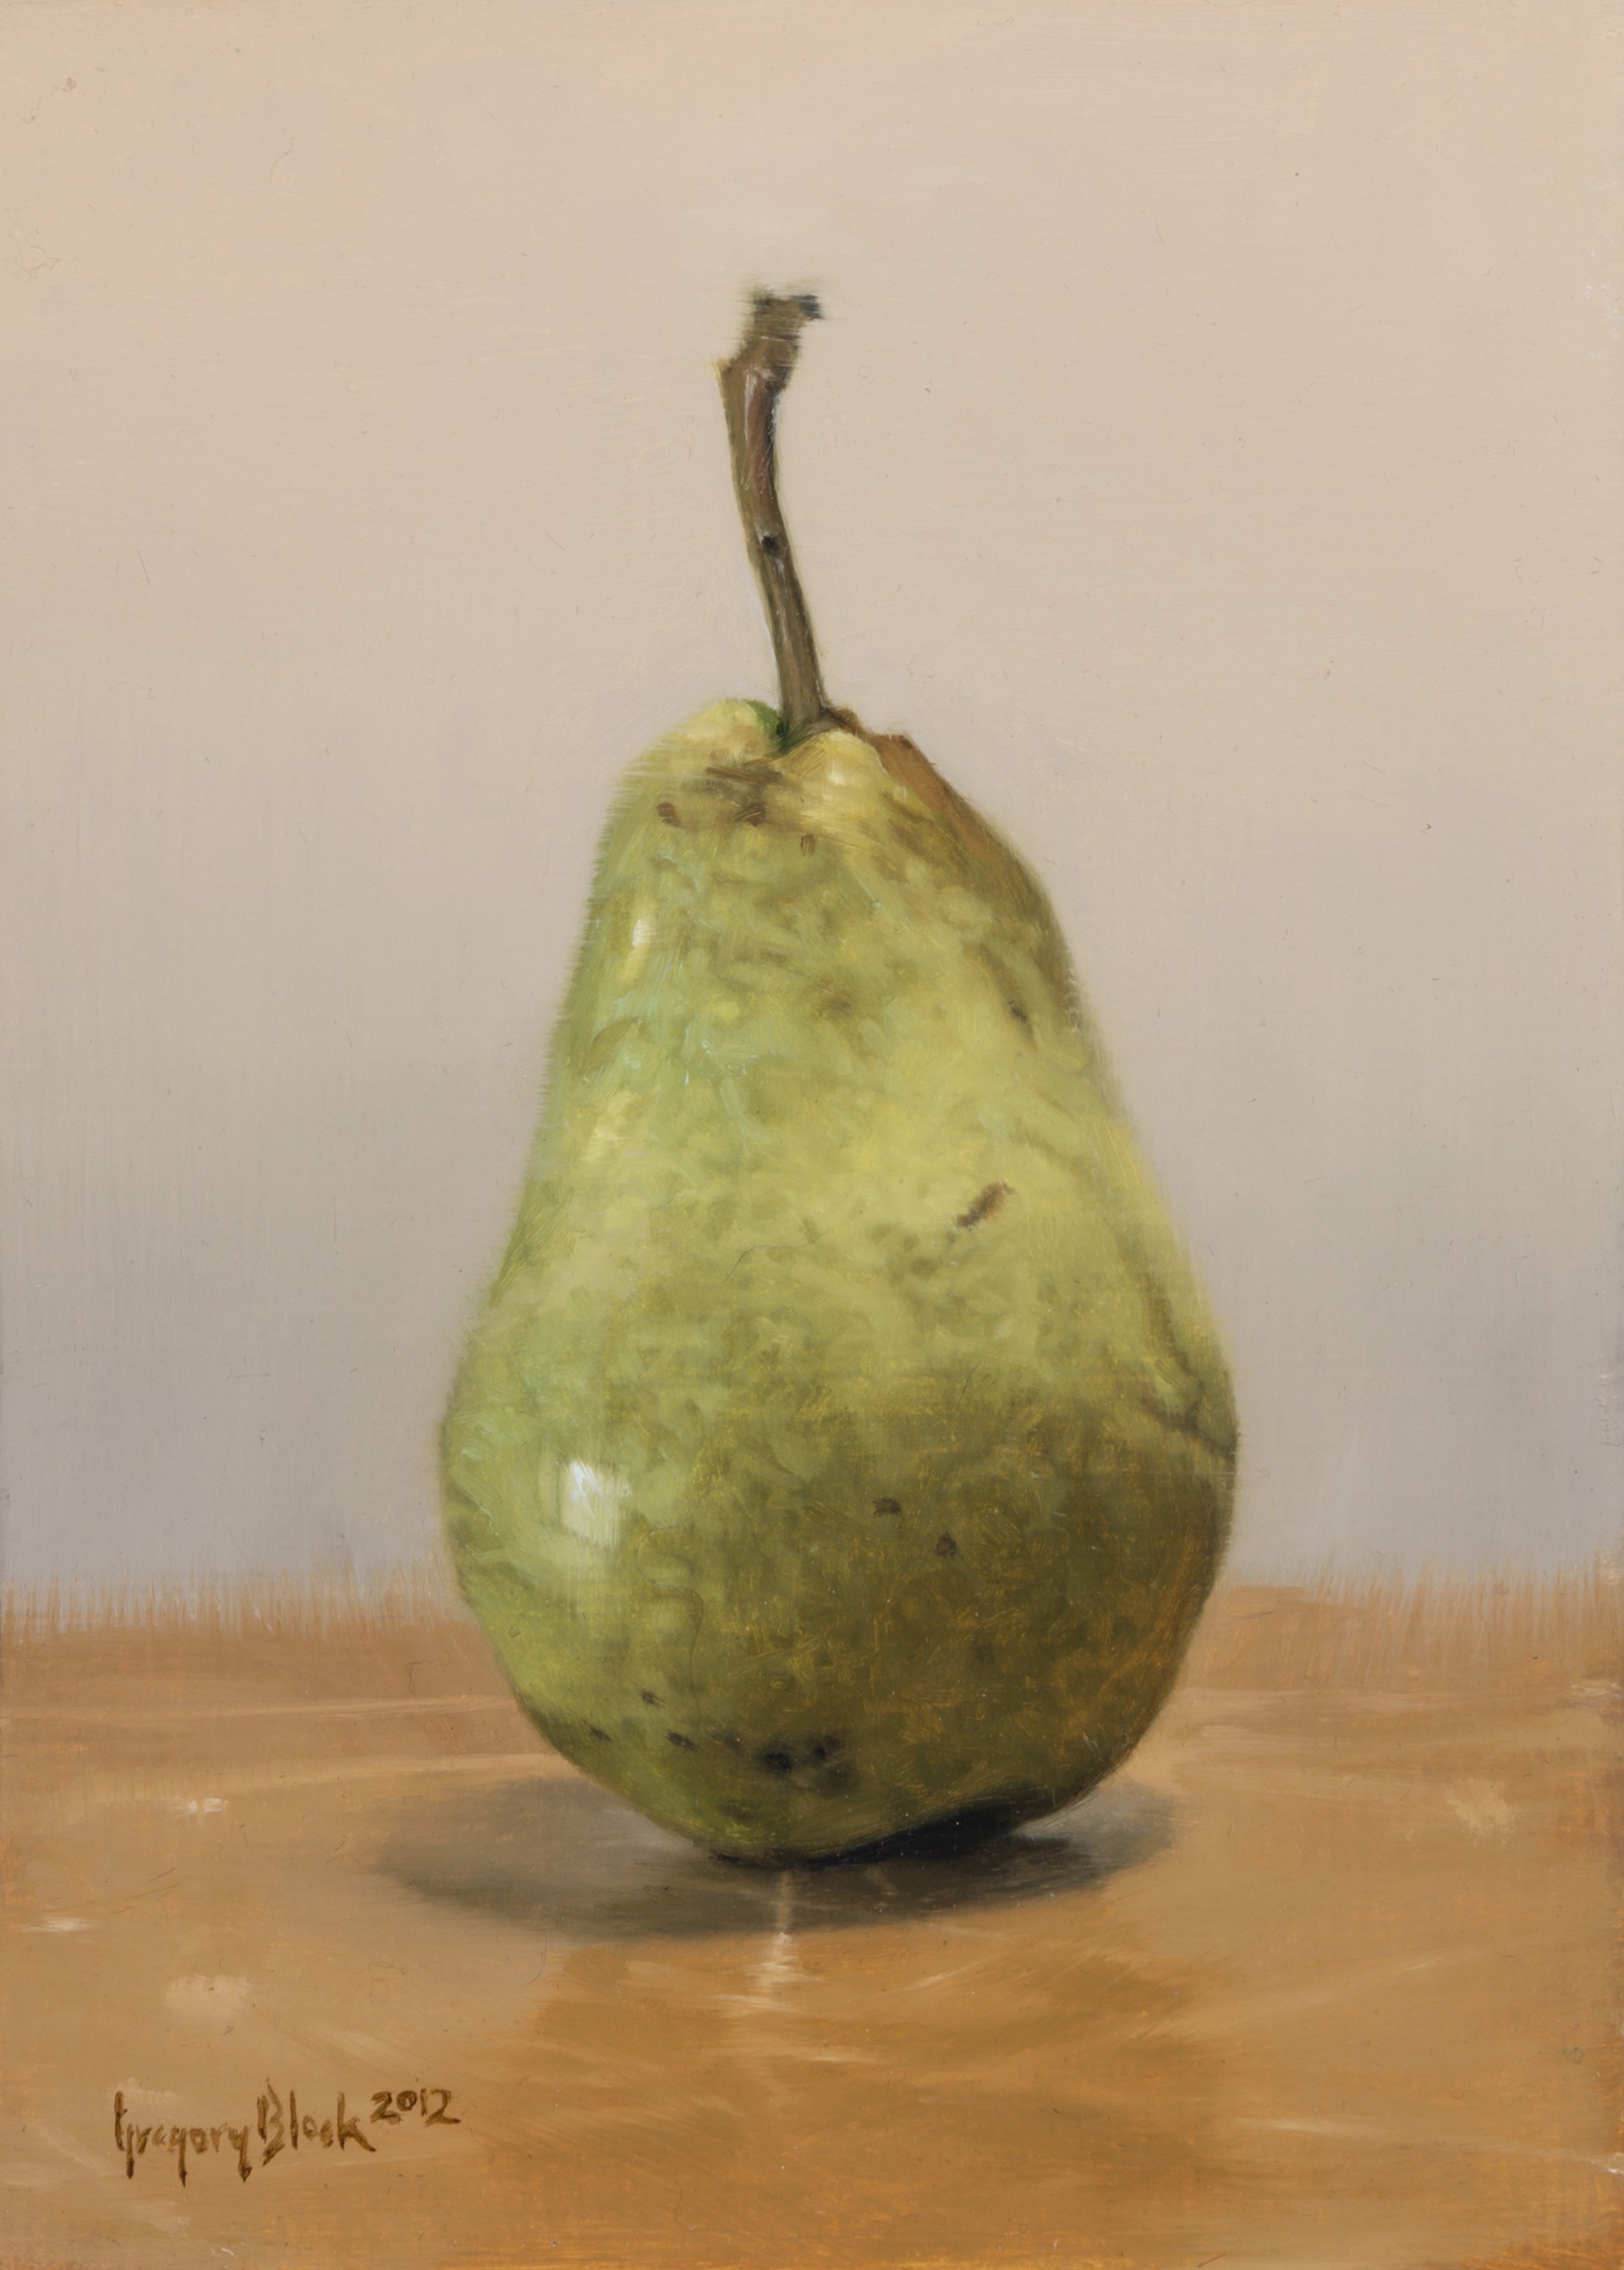 Green Pear by Gregory Block